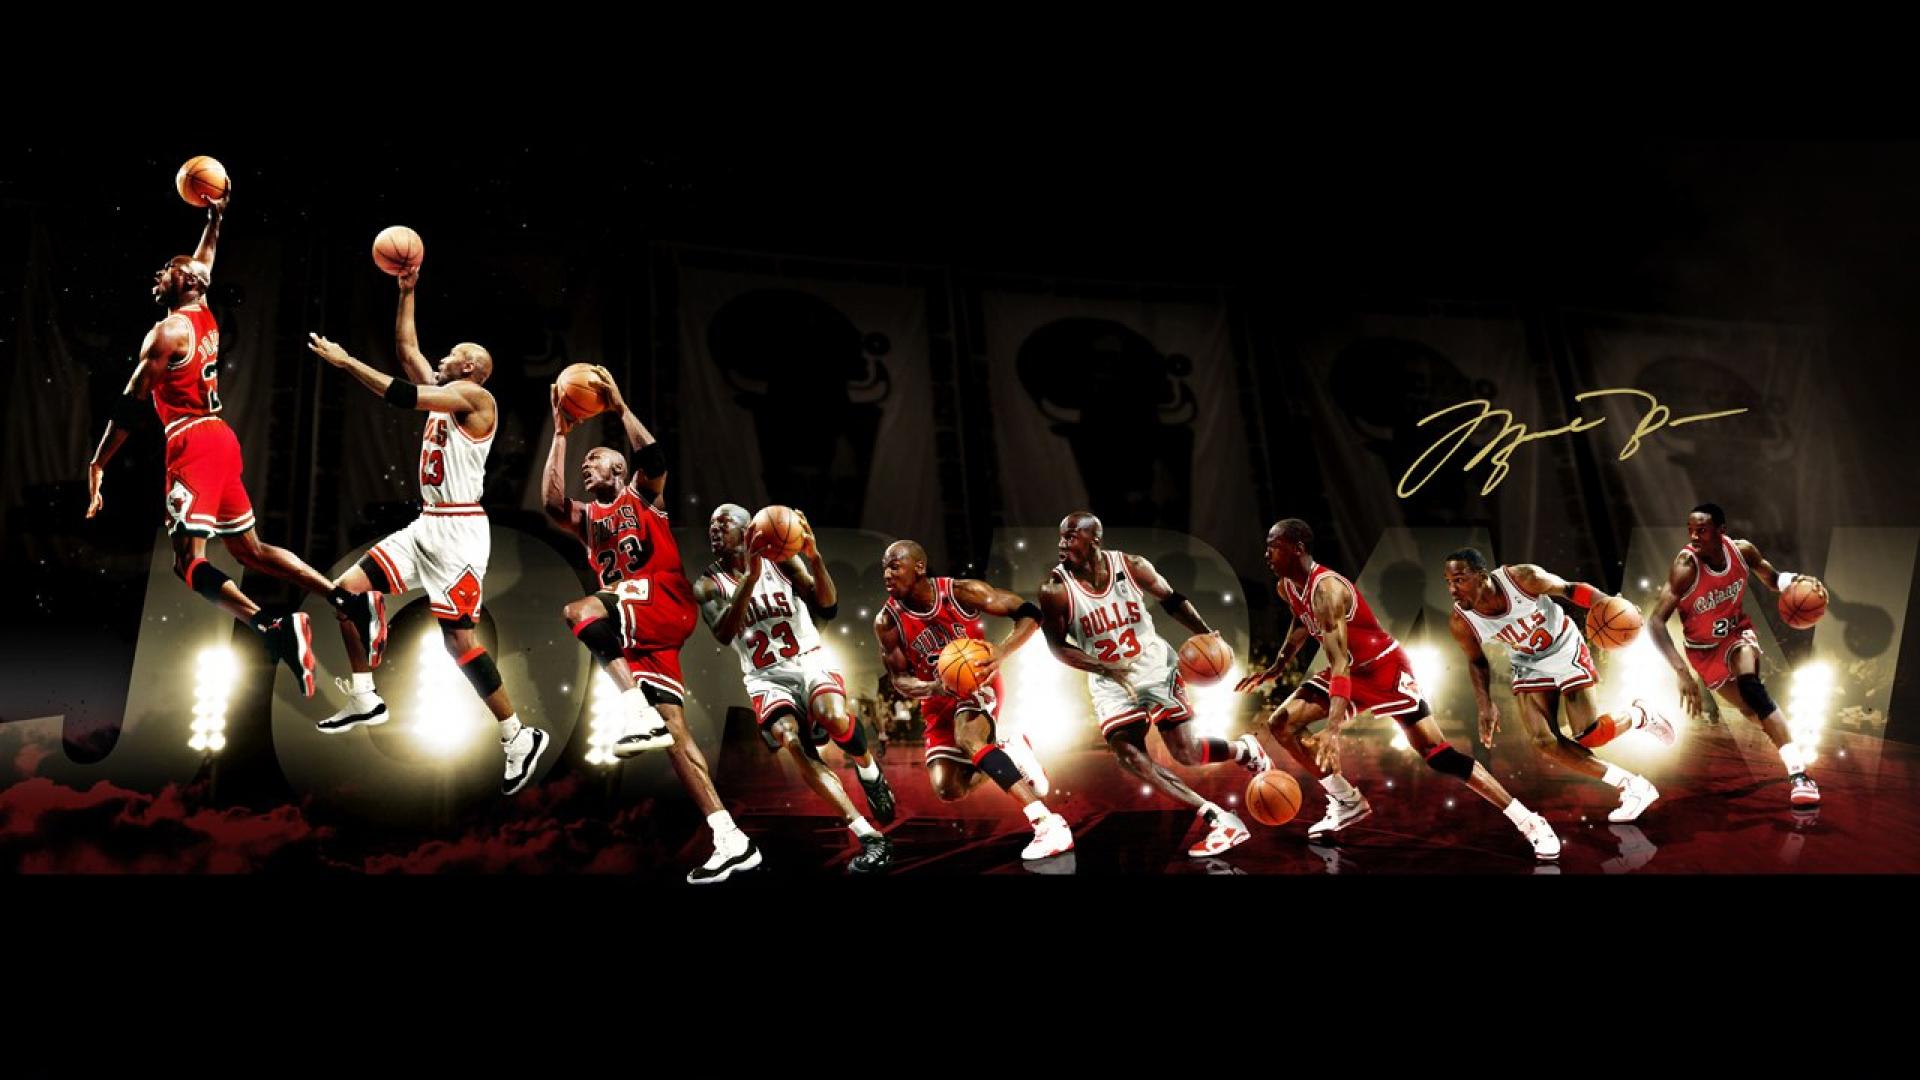 Michael Jordan Wallpaper Celebrity And Movie Pictures Photos Hq